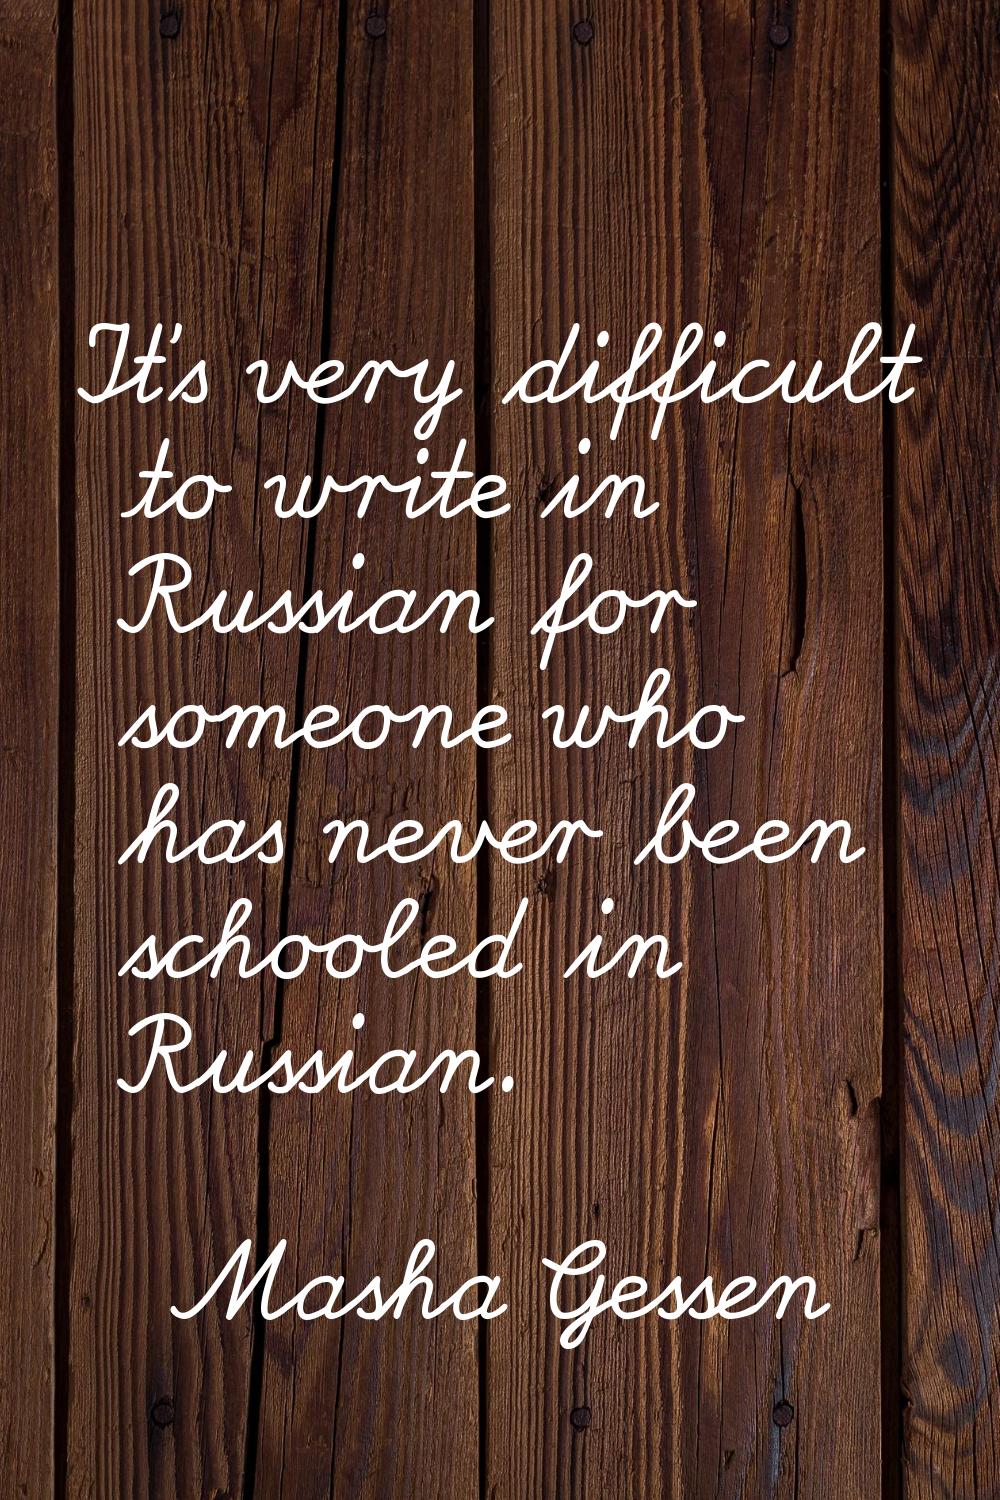 It's very difficult to write in Russian for someone who has never been schooled in Russian.